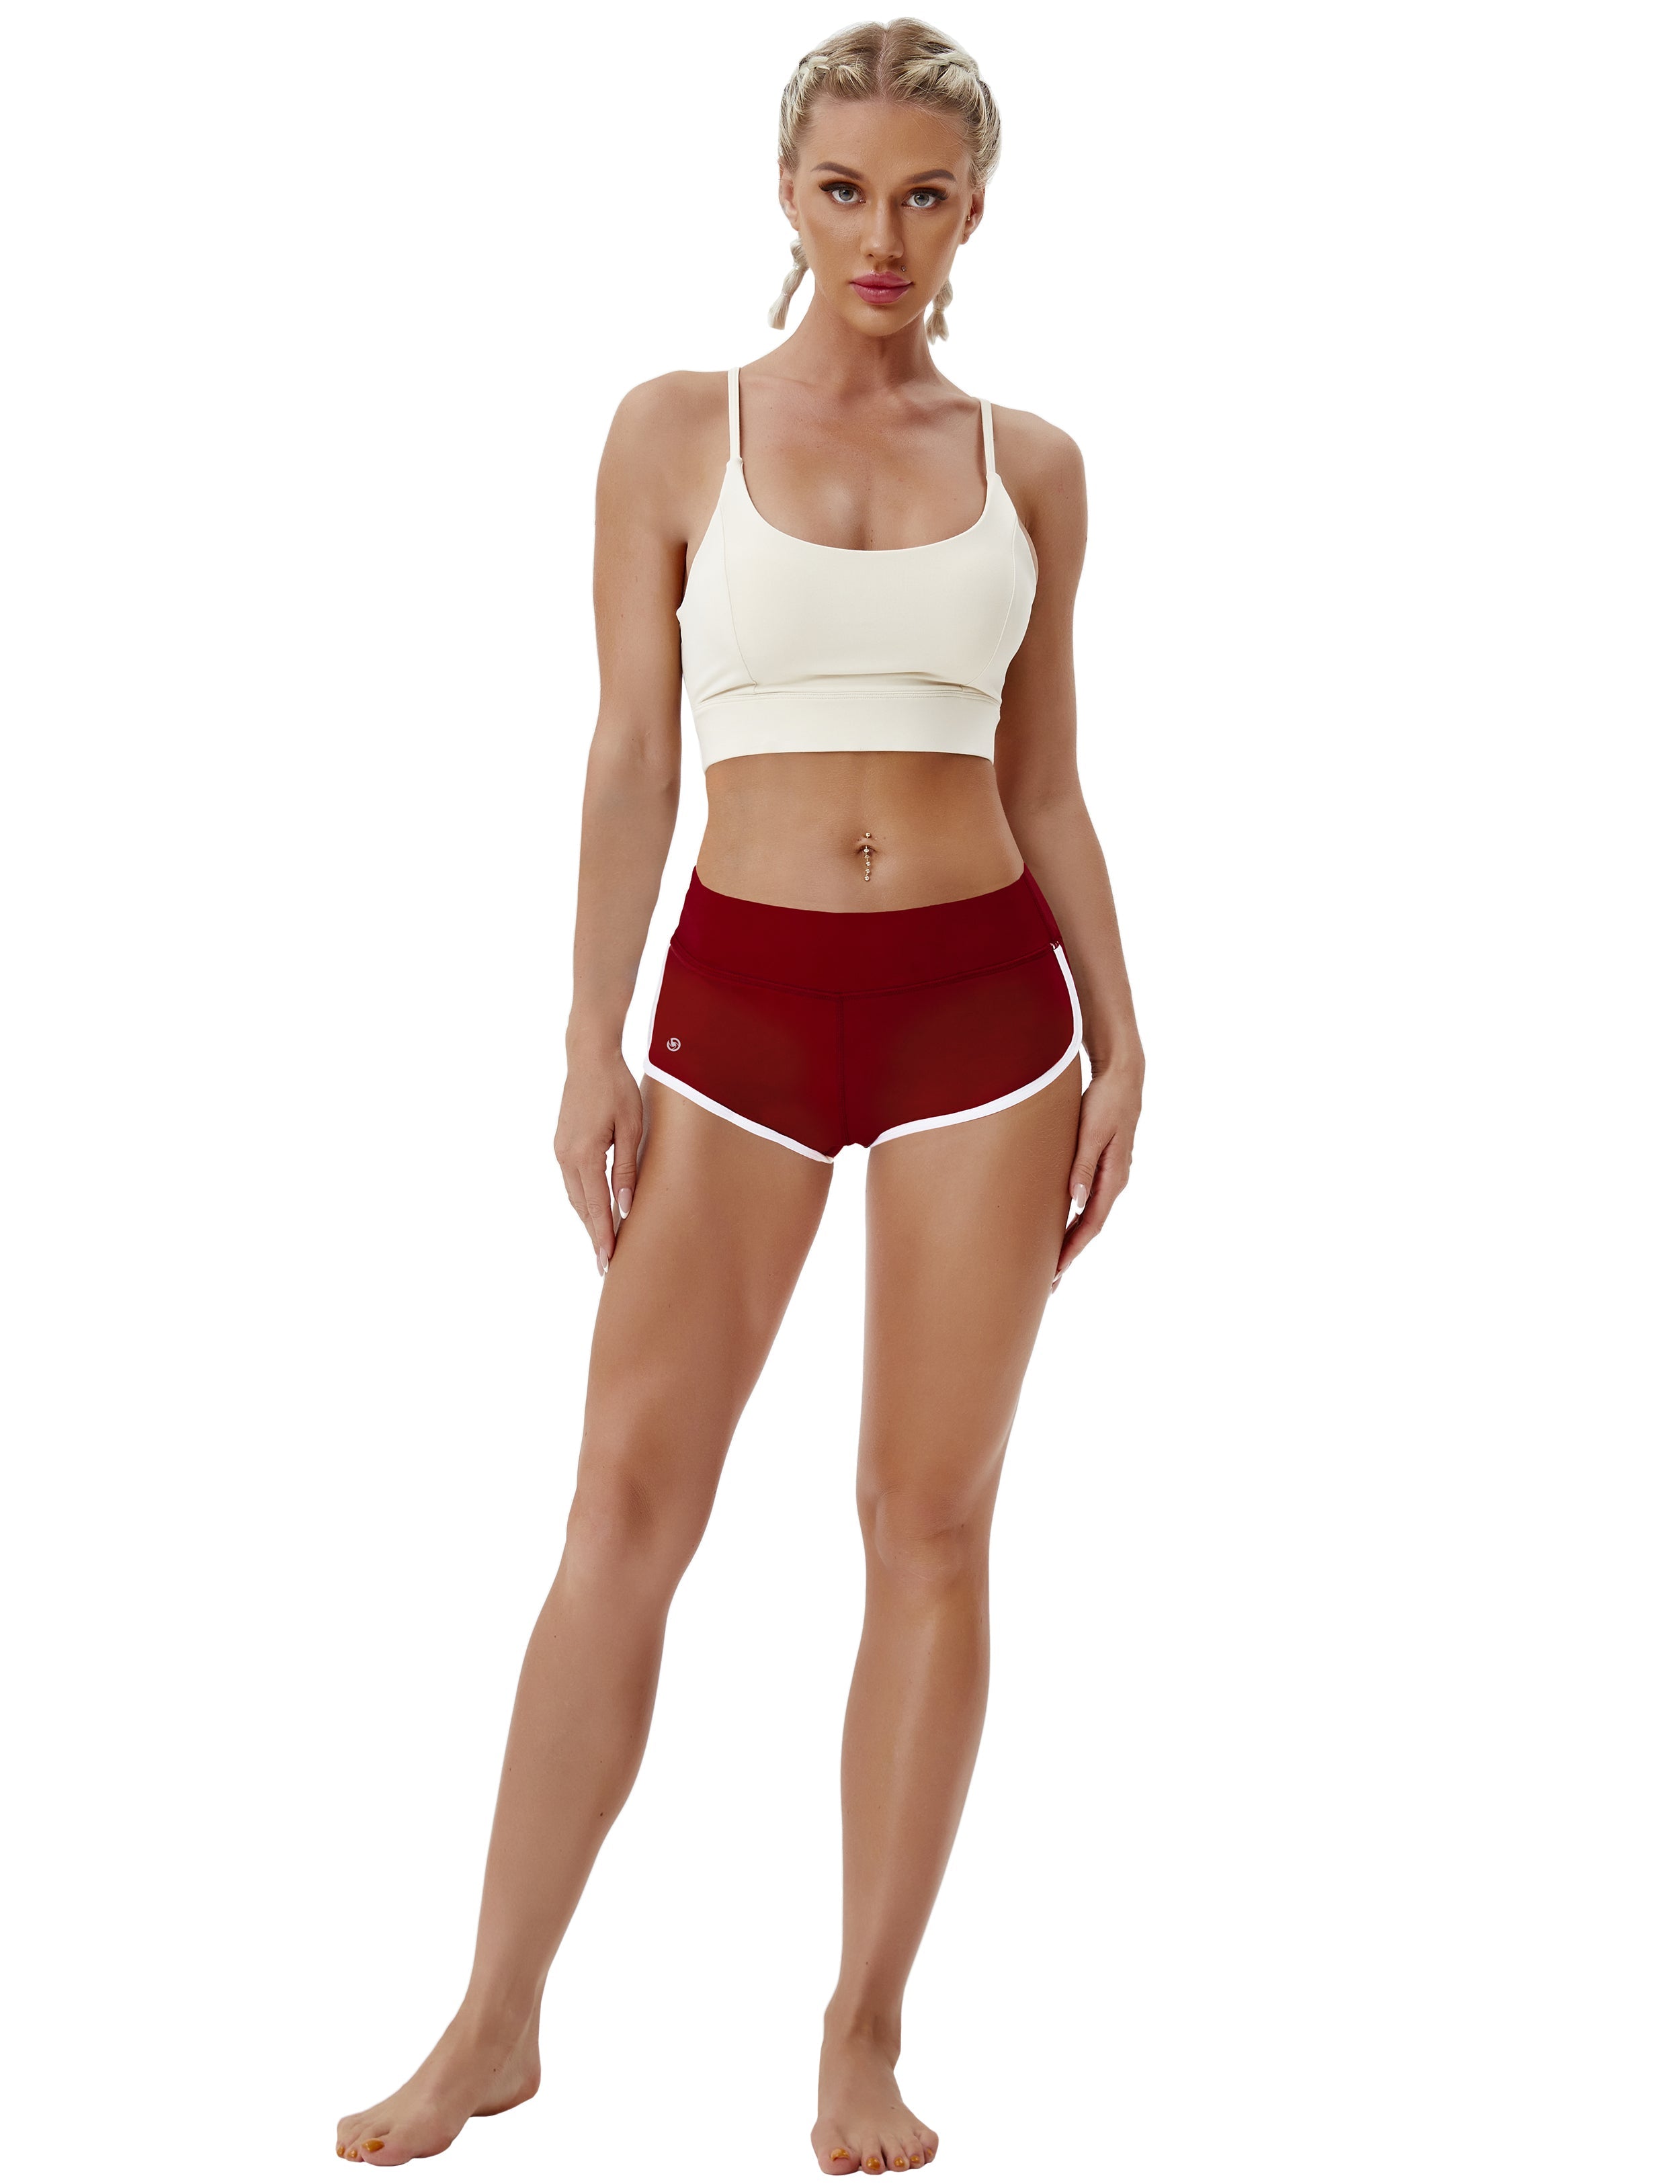 Sexy Booty Pilates Shorts cherryred Sleek, soft, smooth and totally comfortable: our newest sexy style is here. Softest-ever fabric High elasticity High density 4-way stretch Fabric doesn't attract lint easily No see-through Moisture-wicking Machine wash 75%Nylon/25%Spandex